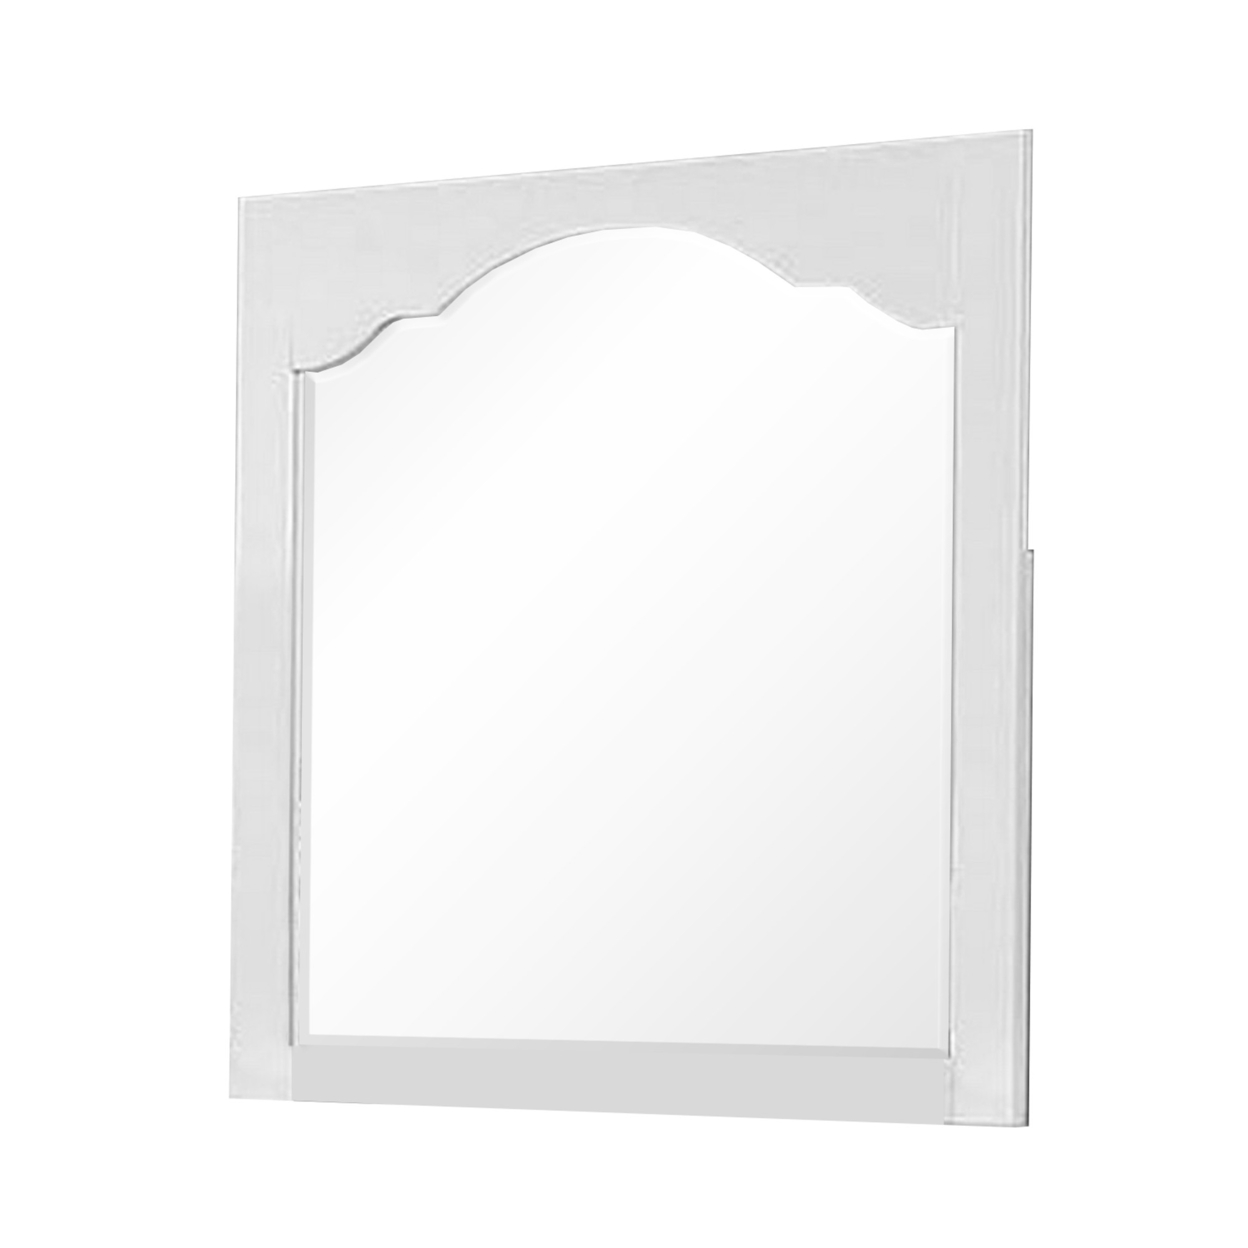 Wall Mirror With Rectangular Wooden Frame And Arched Top, White- Saltoro Sherpi